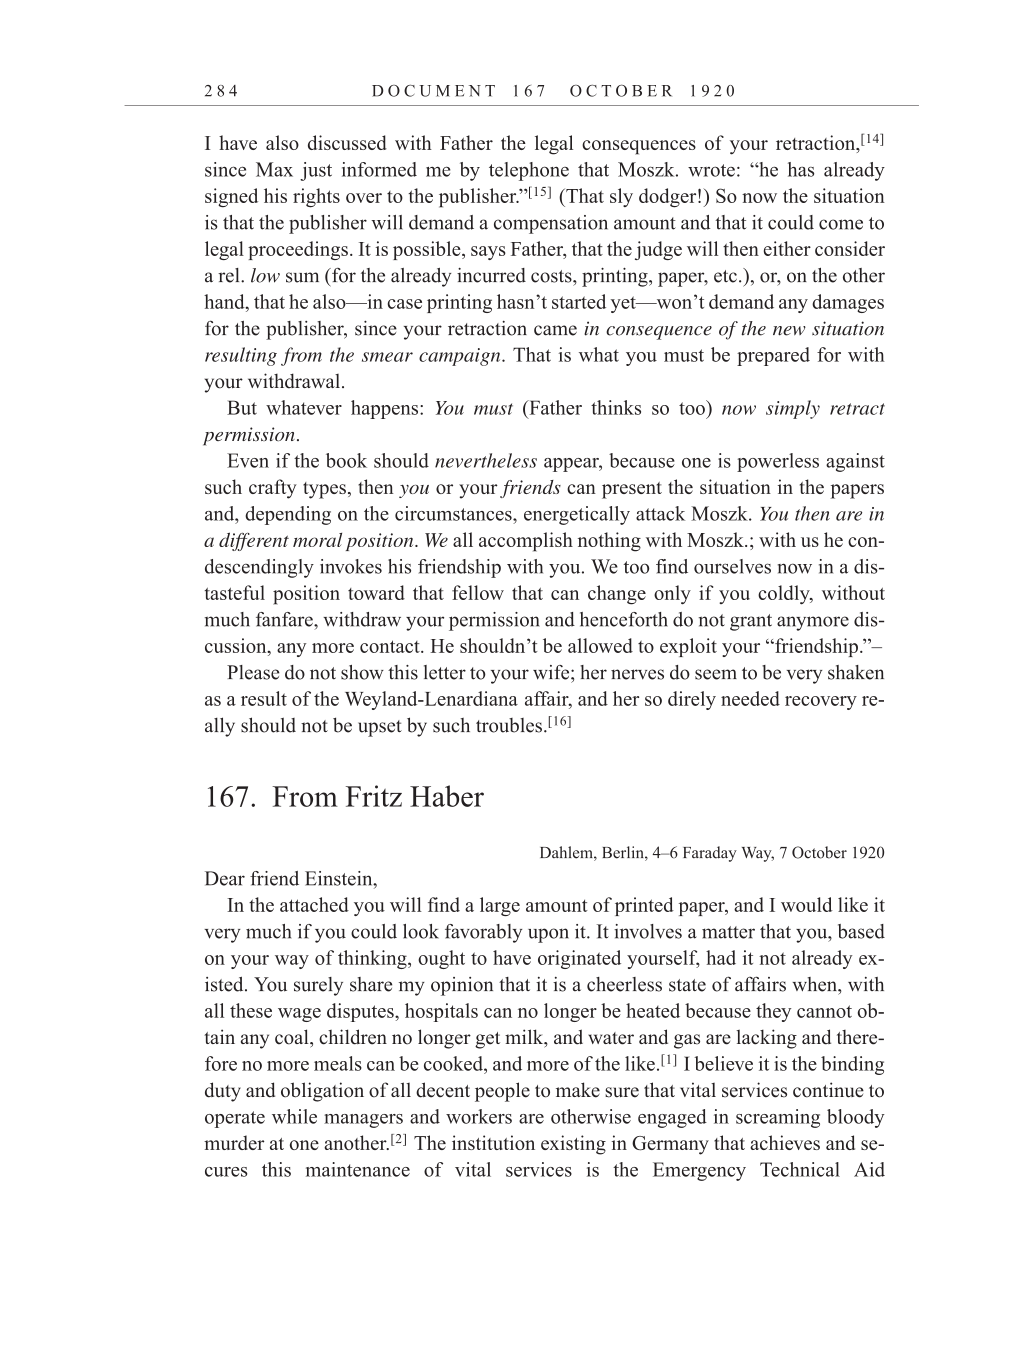 Volume 10: The Berlin Years: Correspondence, May-December 1920, and Supplementary Correspondence, 1909-1920 (English translation supplement) page 284